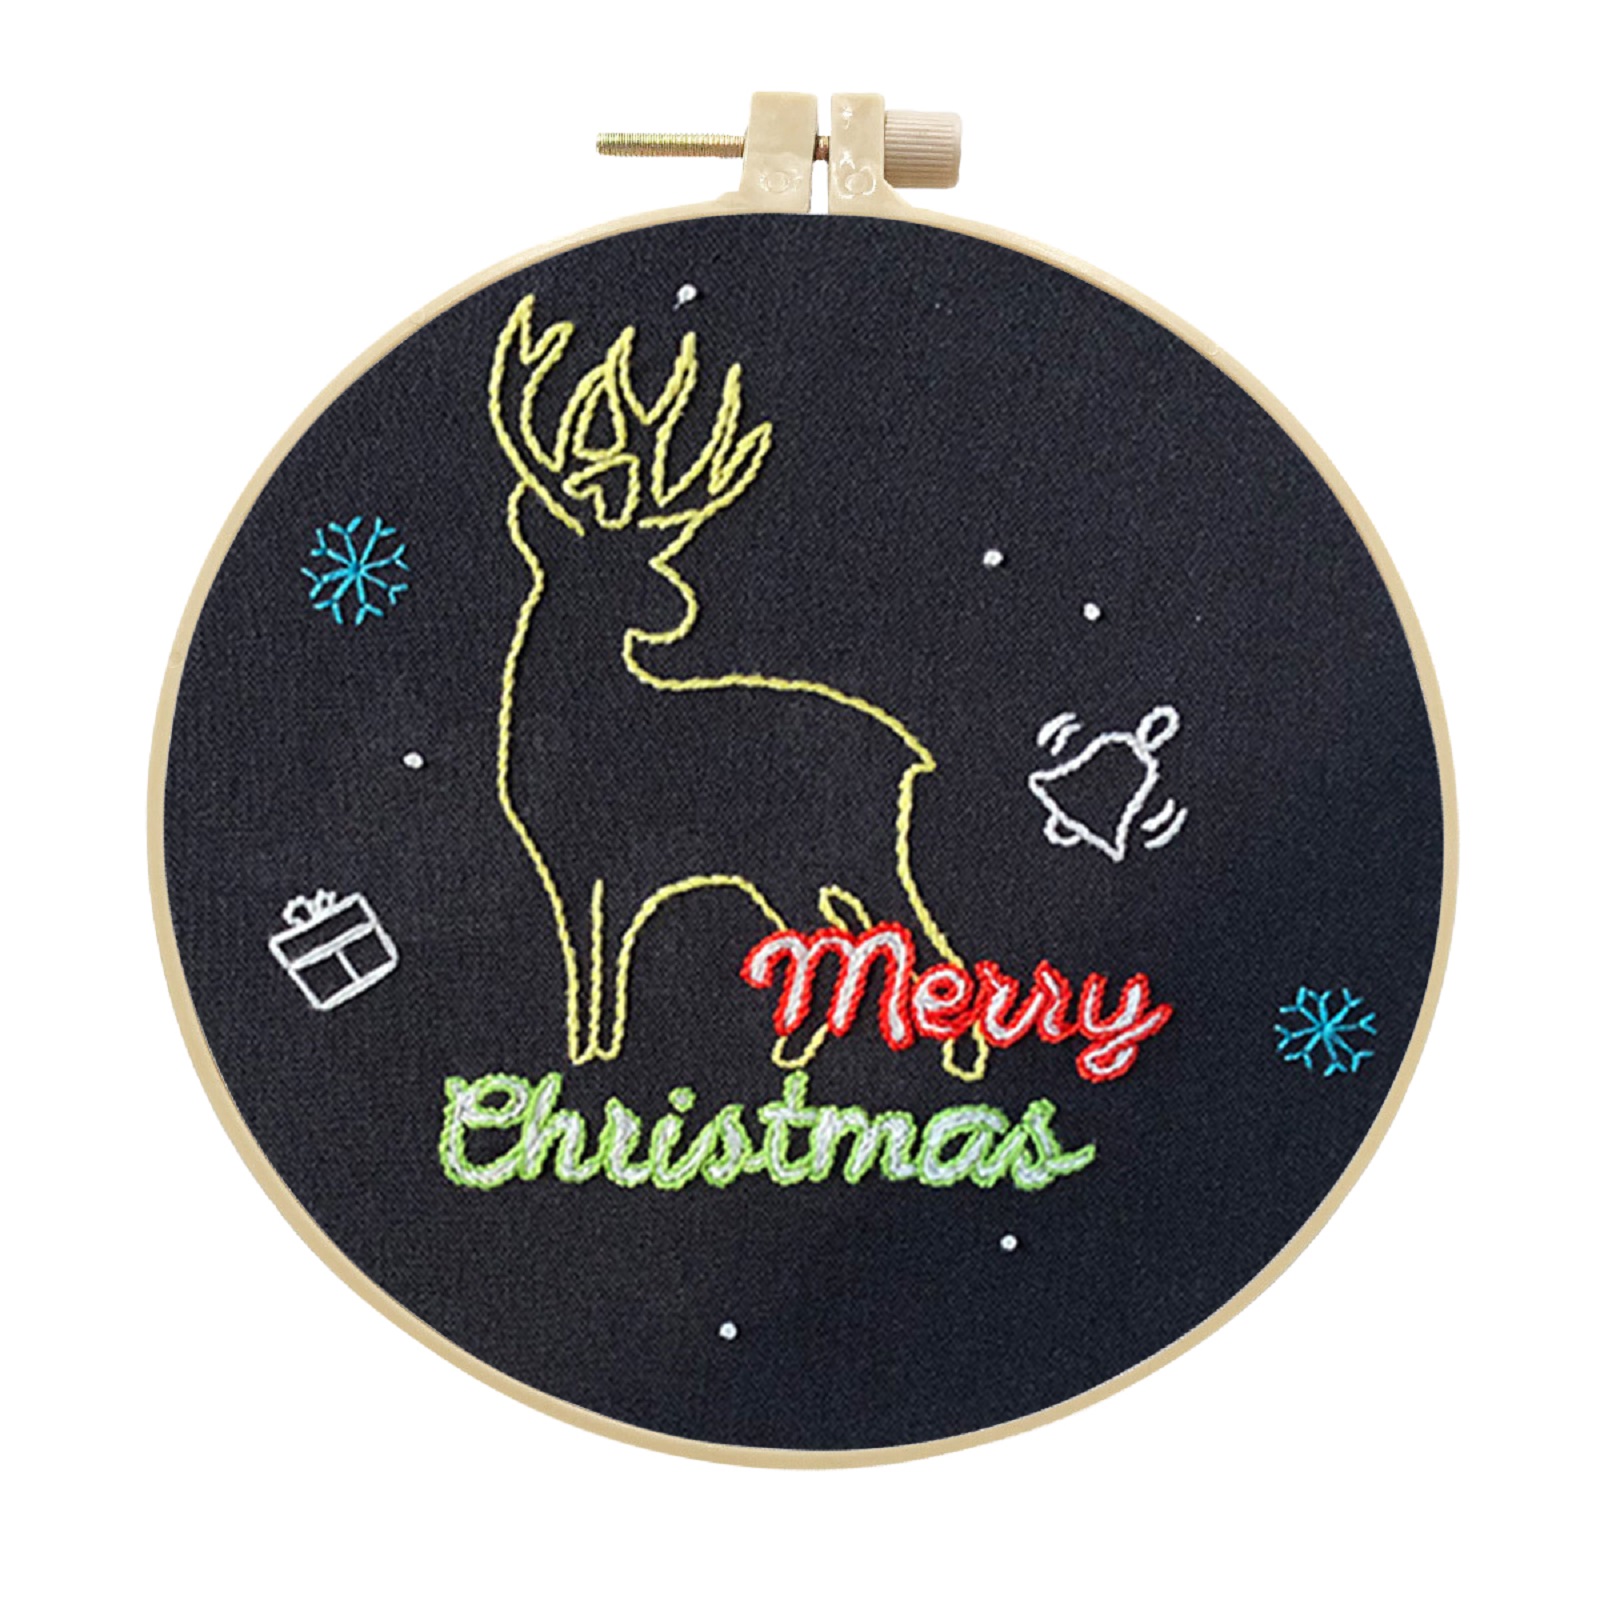 Embroidery kit with Patterns and Instructions for Adult Beginner - Minimalist Elk Pattern